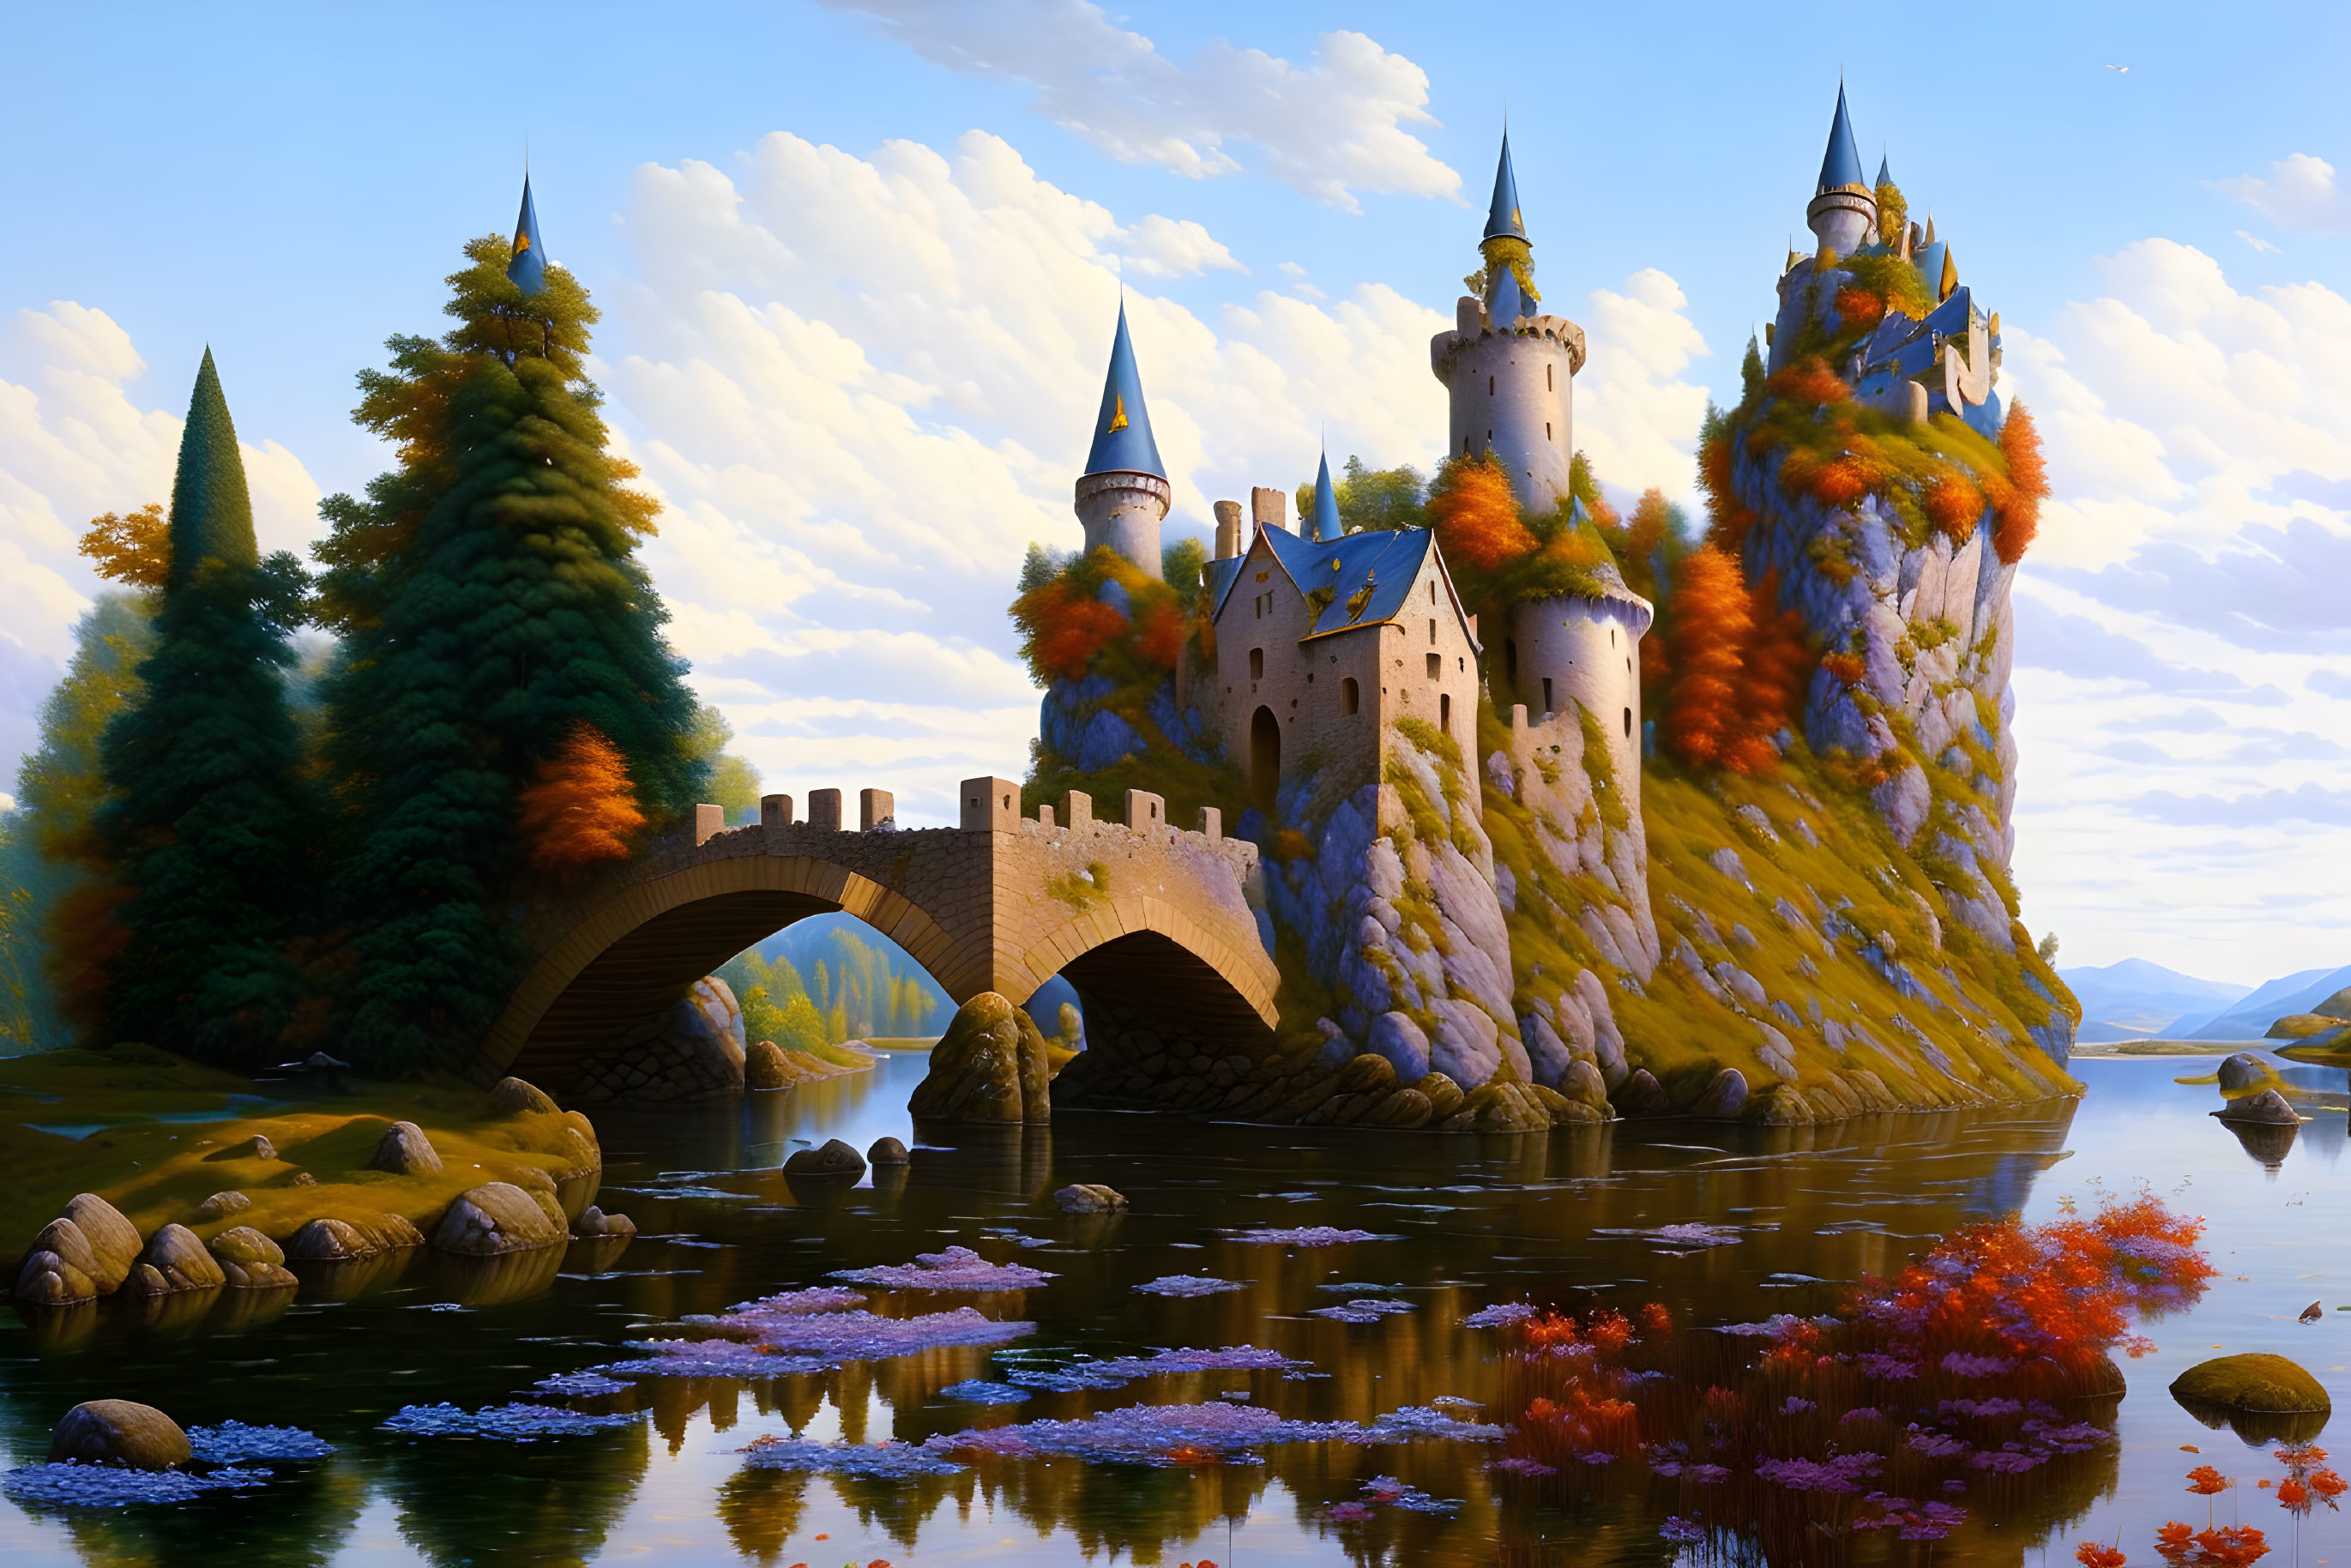 Fairytale castle on rocky cliff with autumn foliage and river bridge